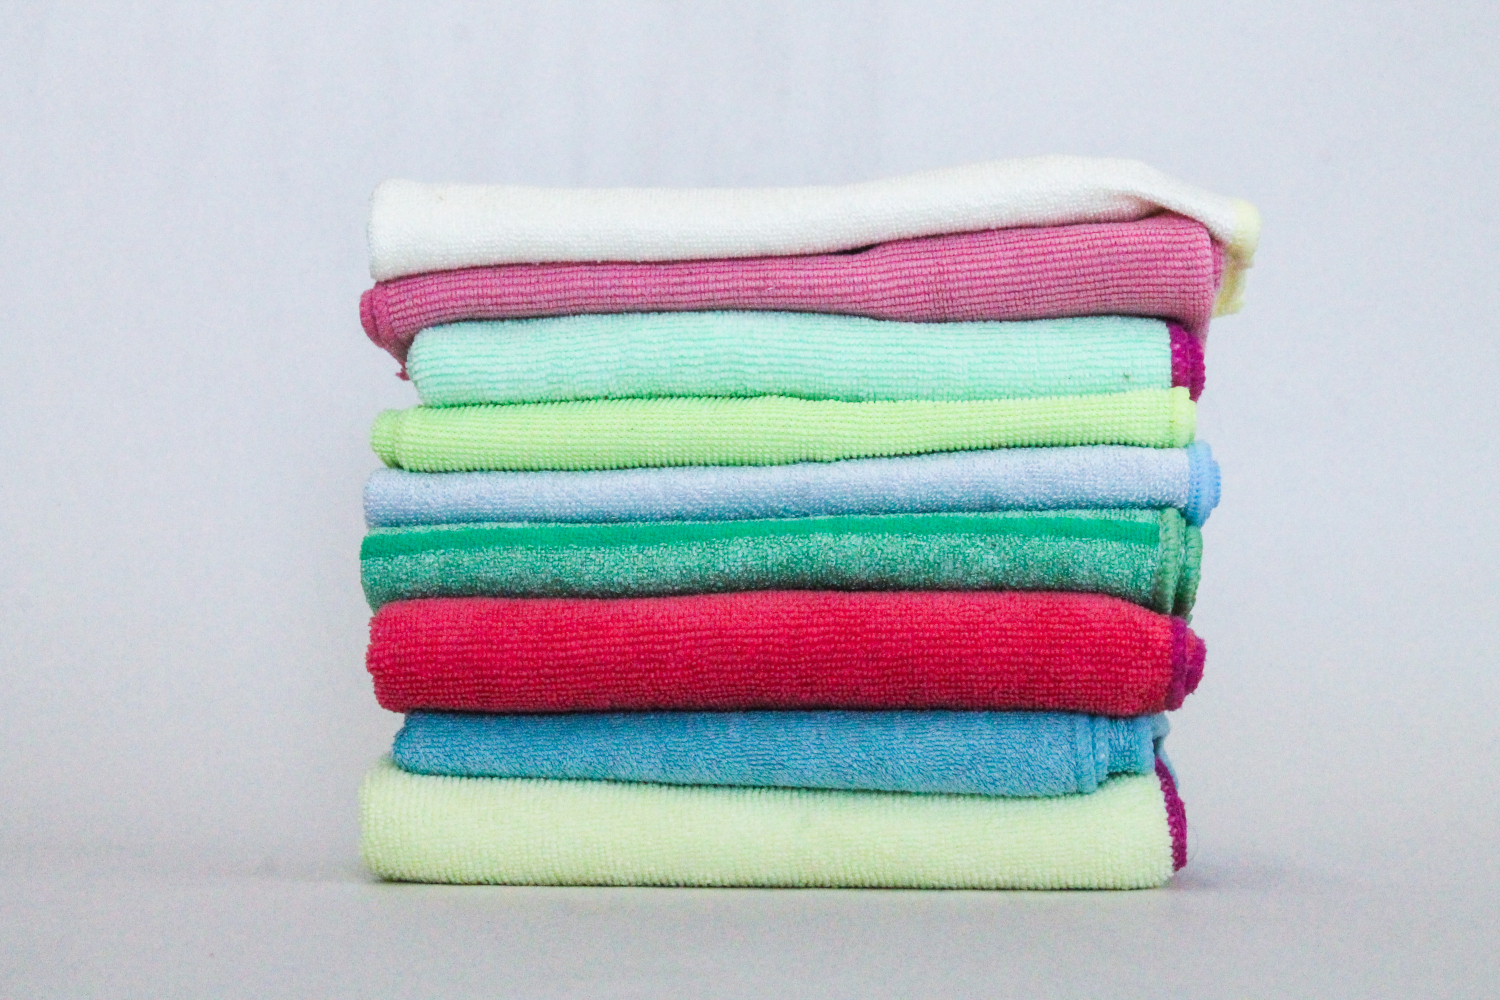 Microfibre cloths in different colors